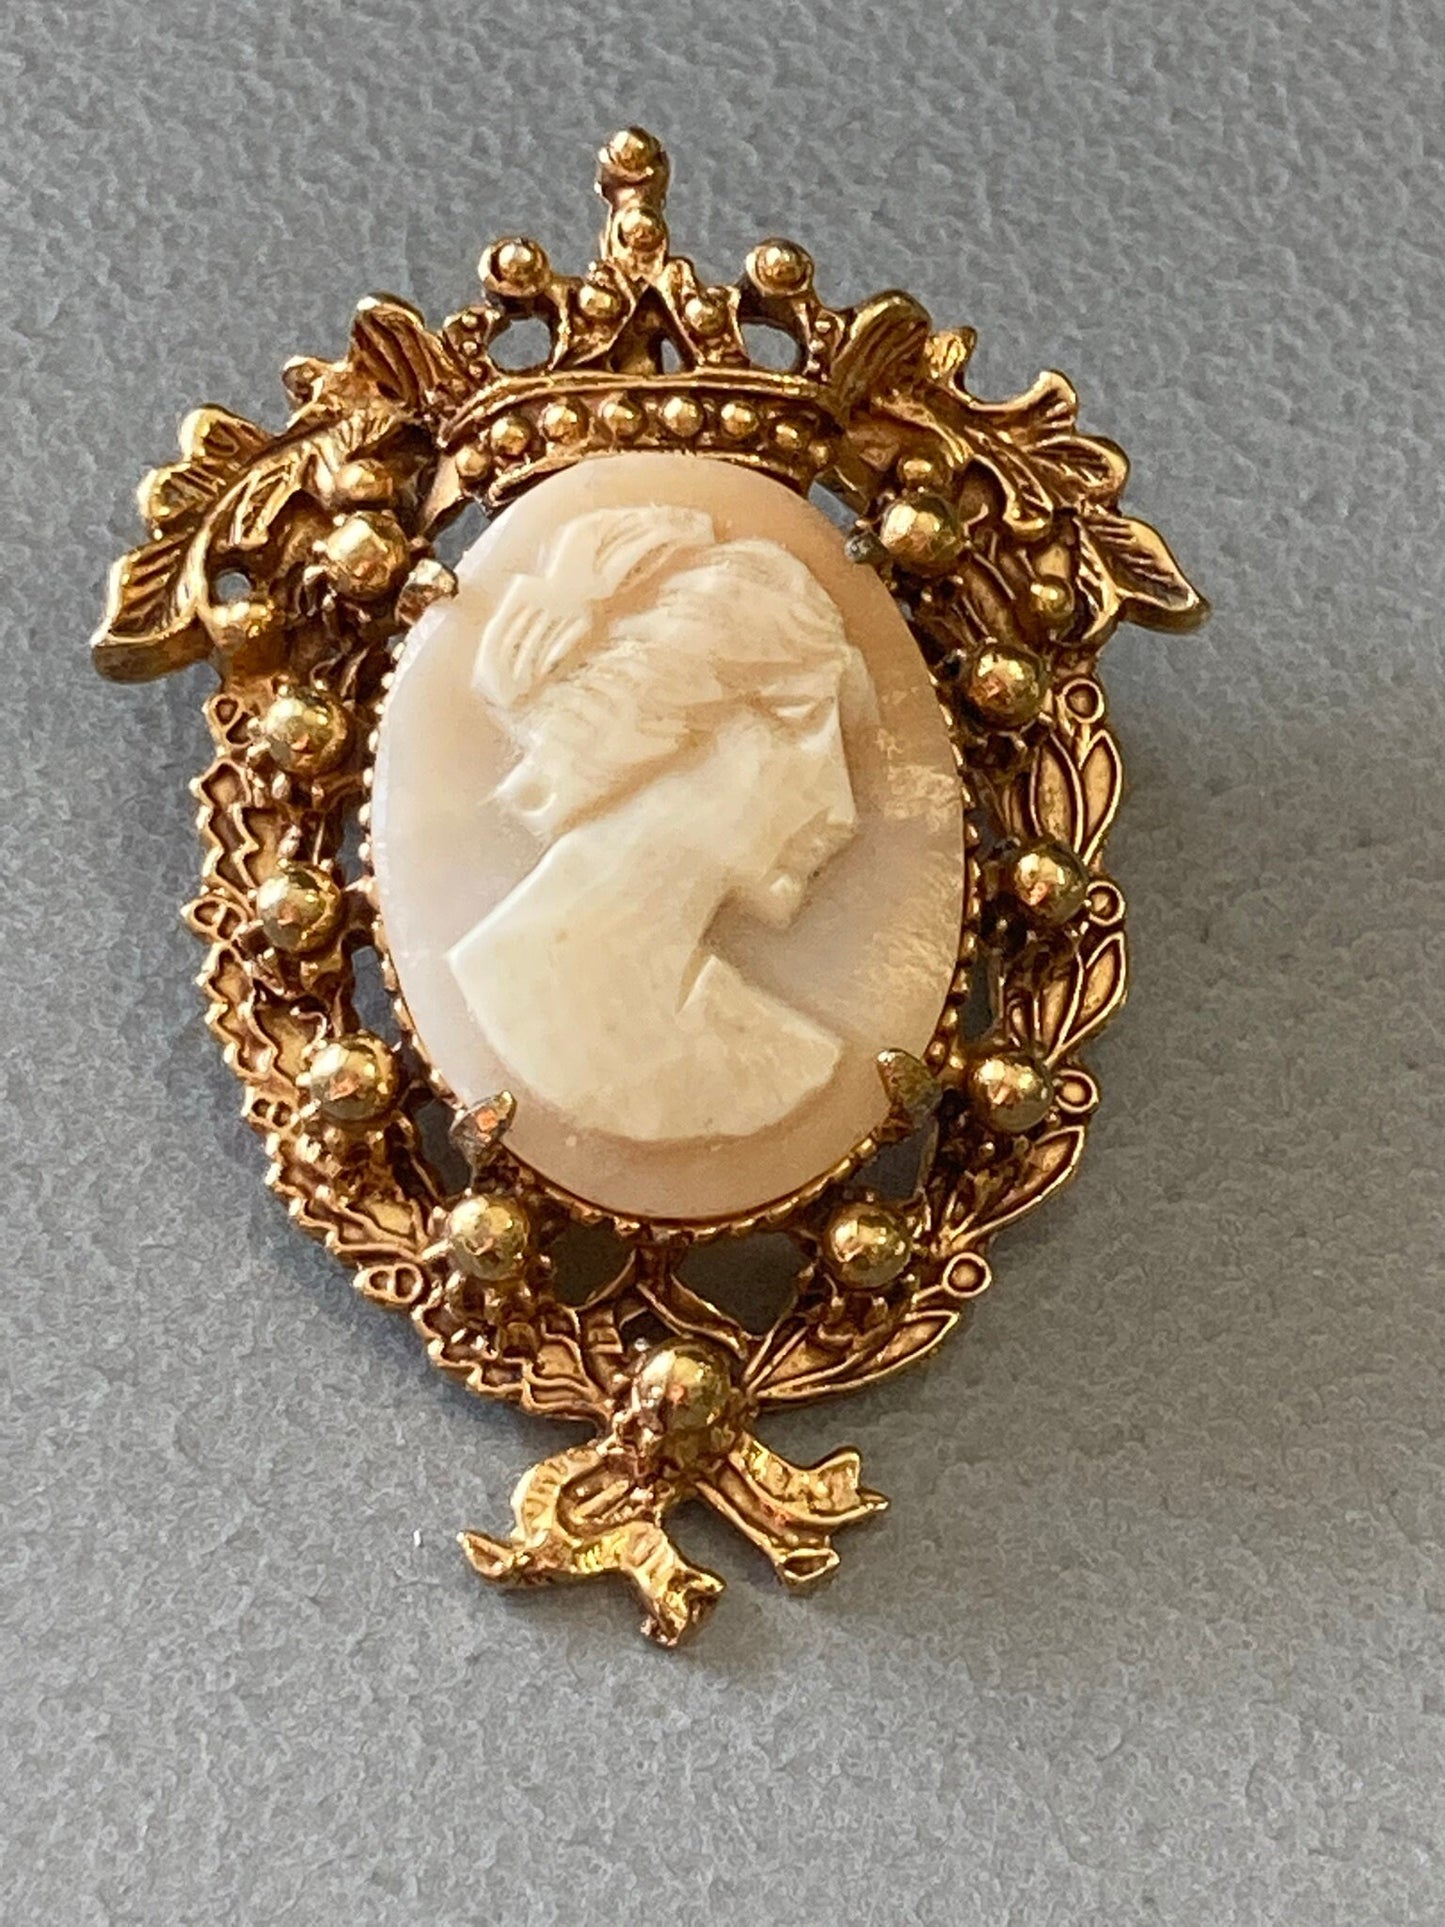 Signed FLORENZA Vintage retro ornate gold tone carved shell CAMEO brooch with roll clasp